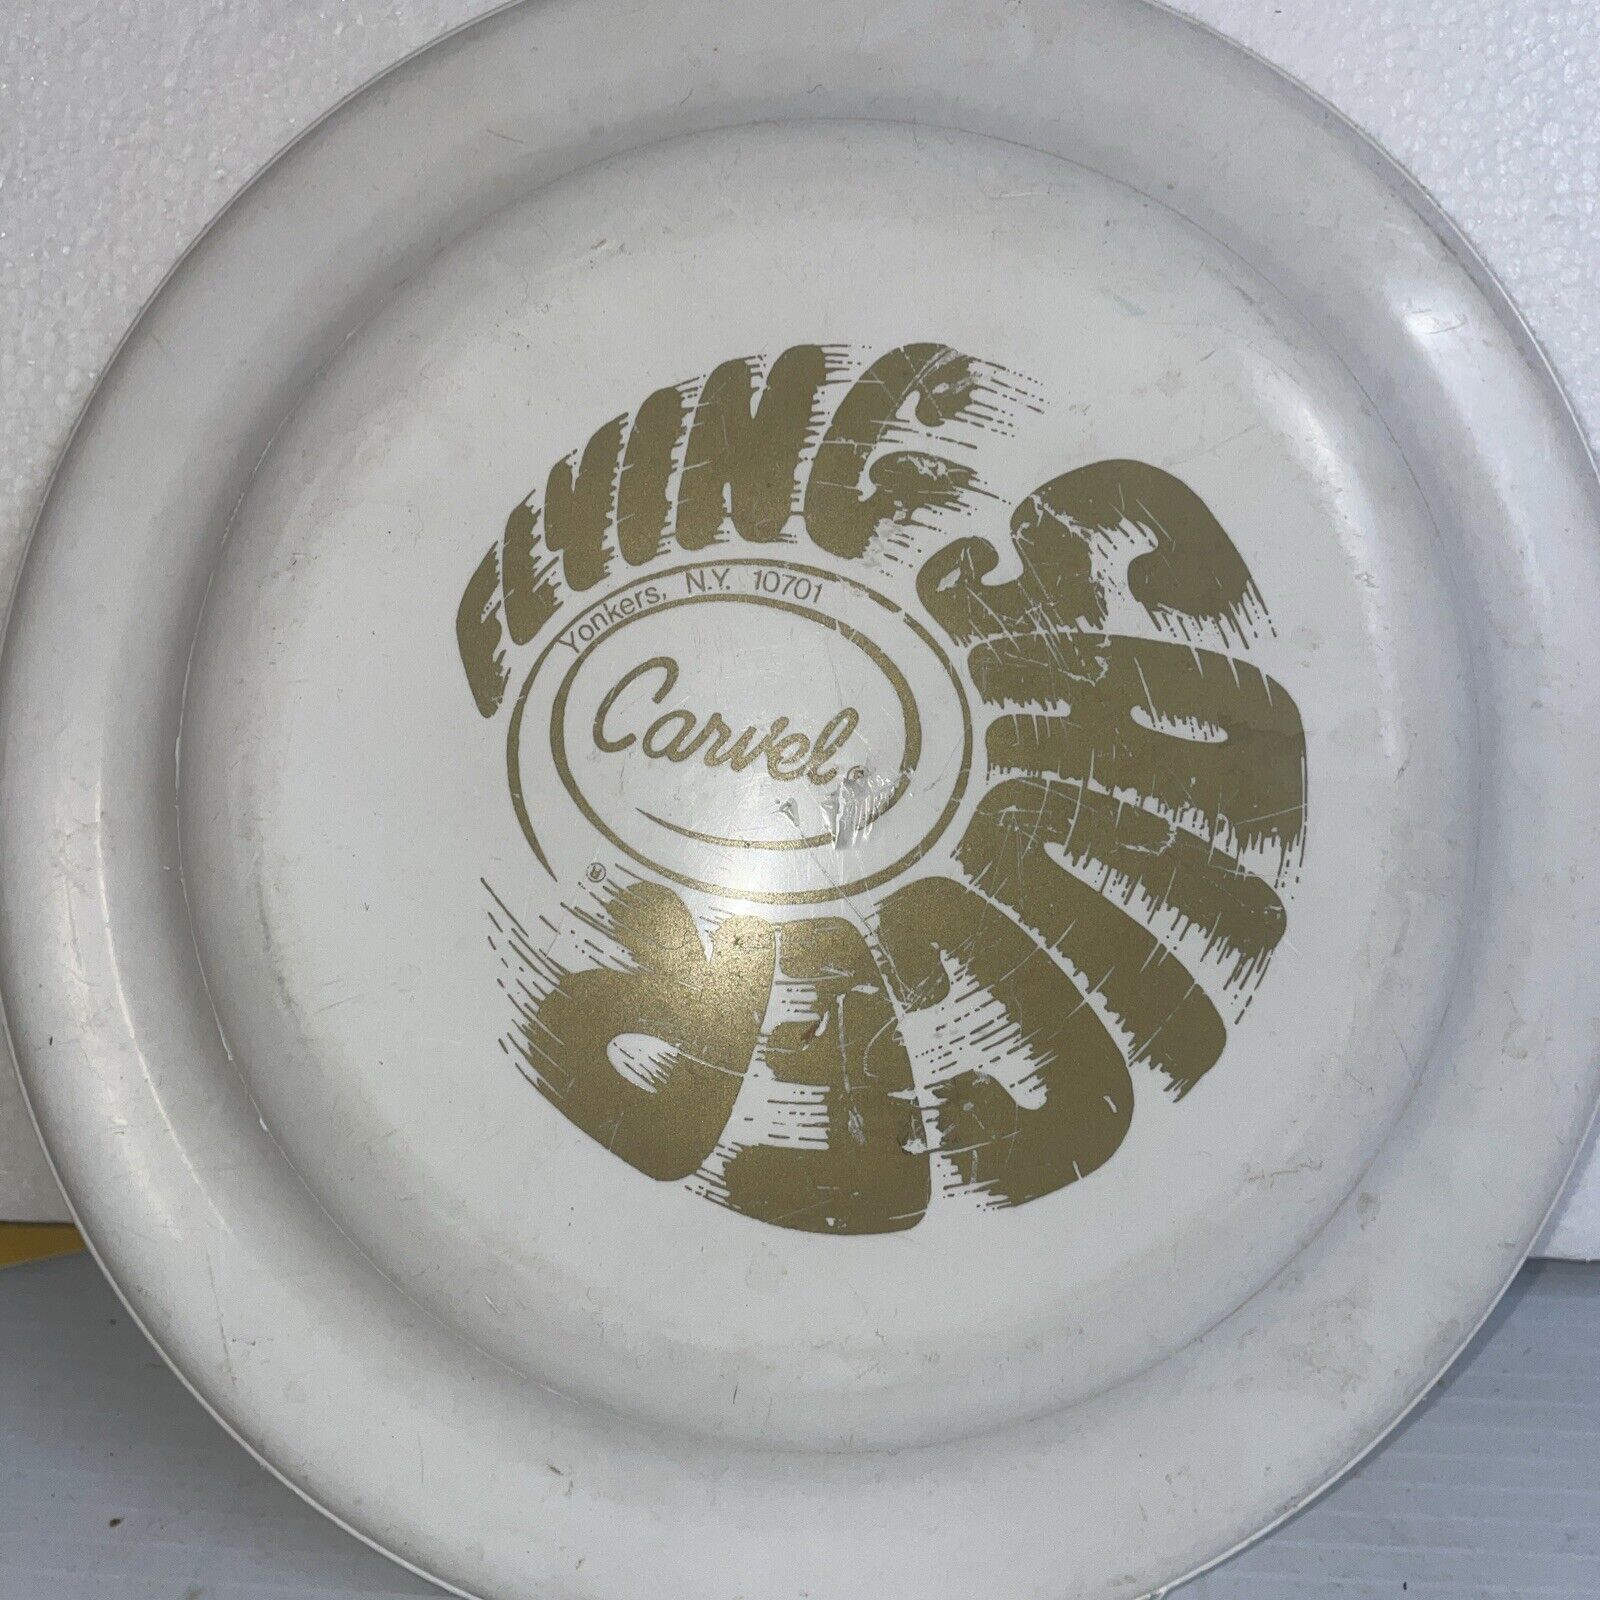 PROMOTIONAL CARVEL ICE CREAM FLYING SAUCER FRISBEE